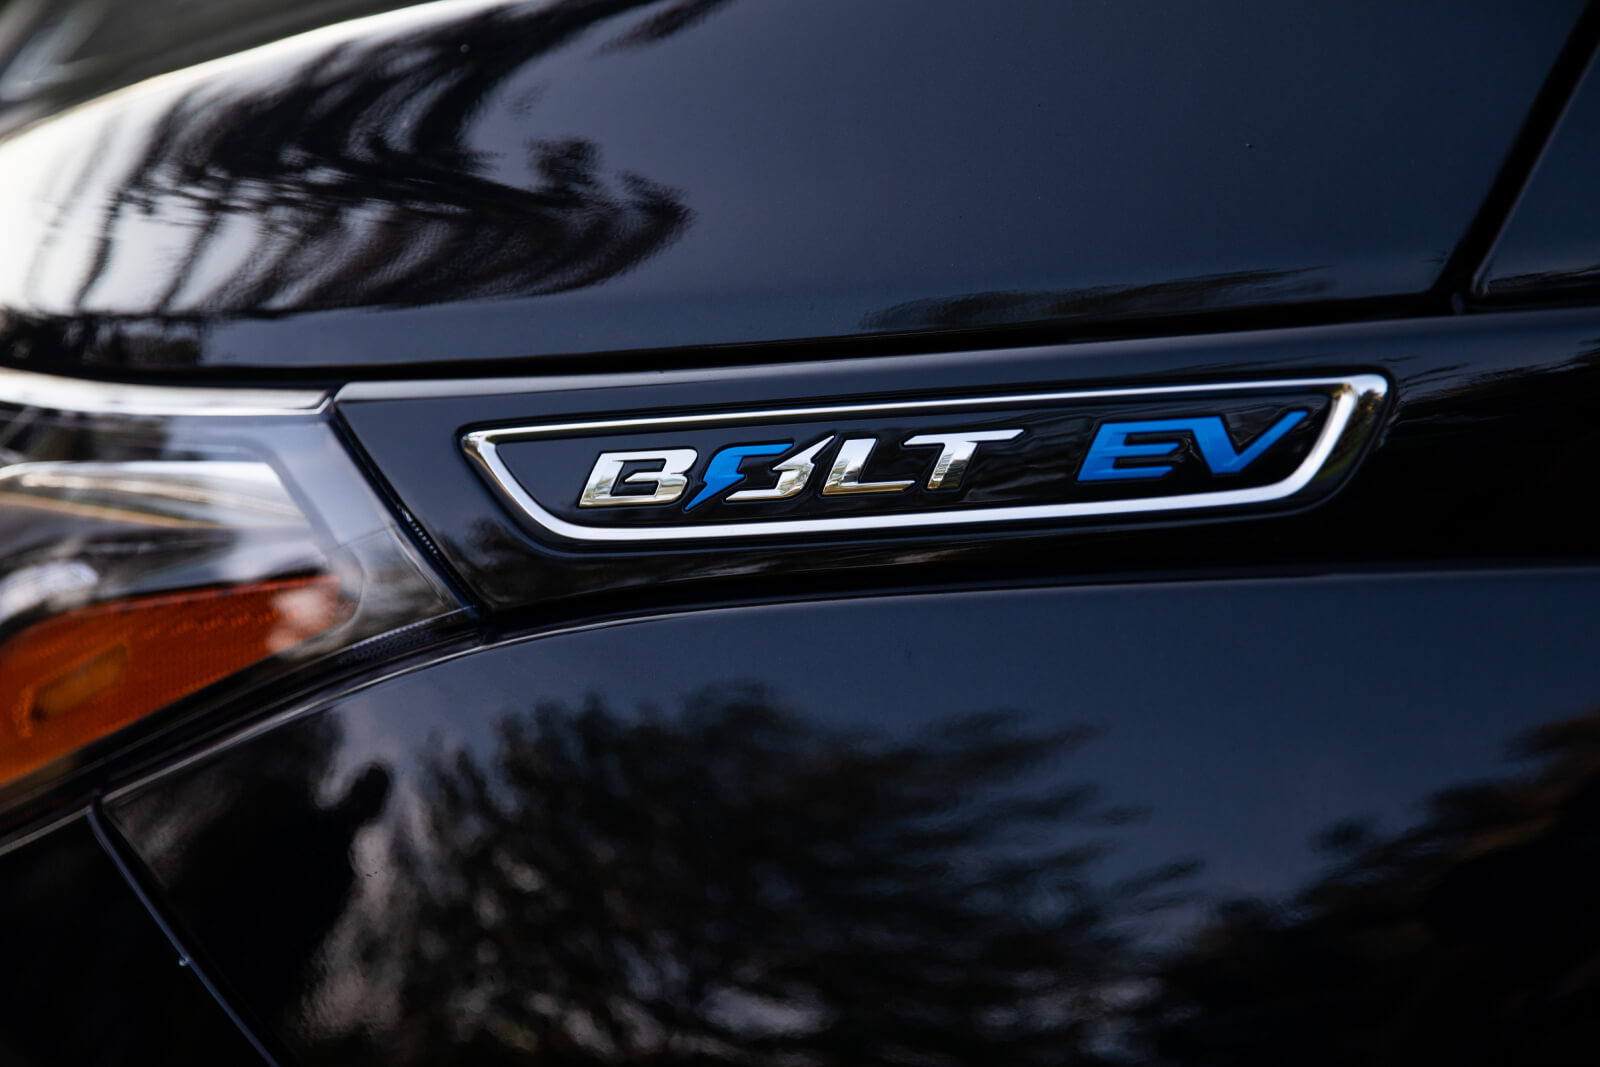 Close up of the badging on a black Chevy Bolt EV.